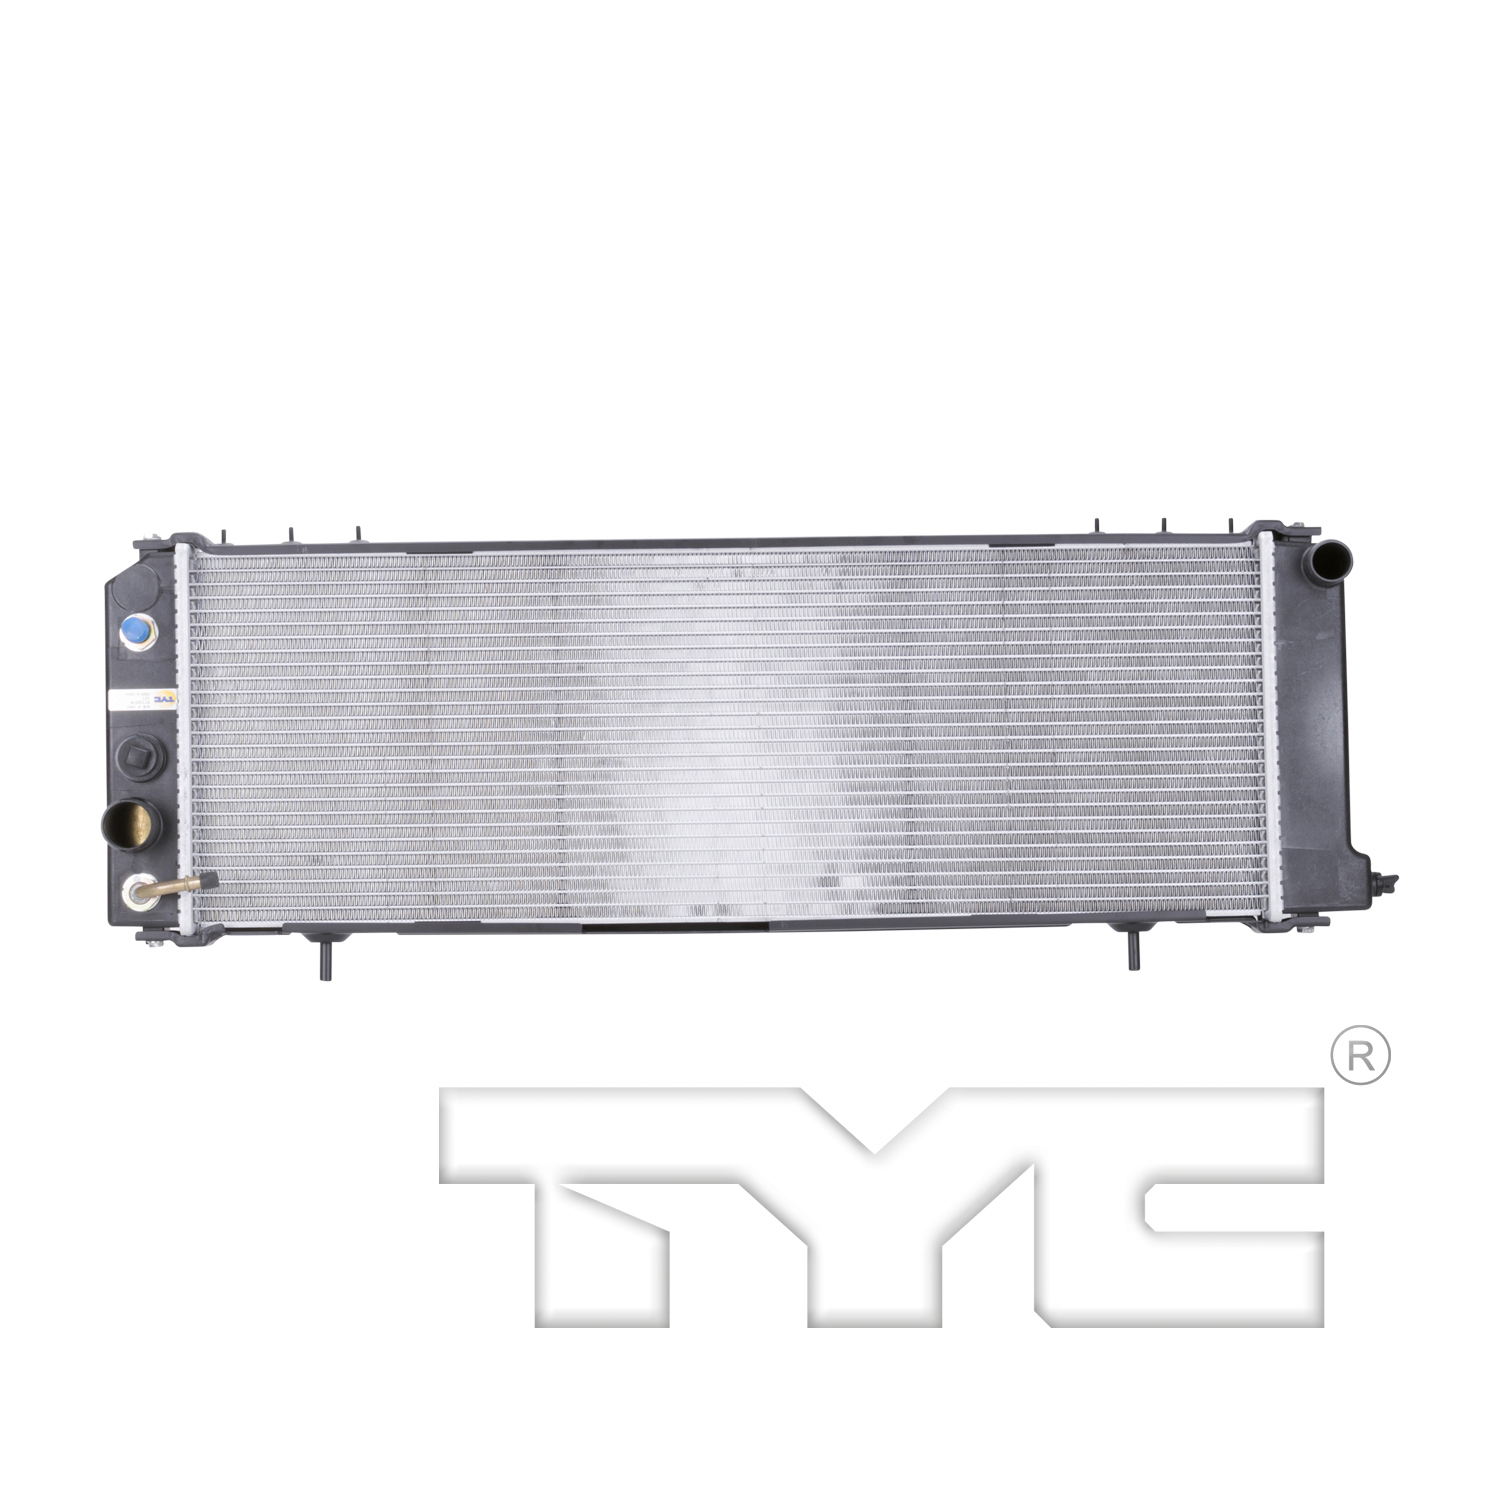 Aftermarket RADIATORS for JEEP - COMANCHE, COMANCHE,86-90,Radiator assembly